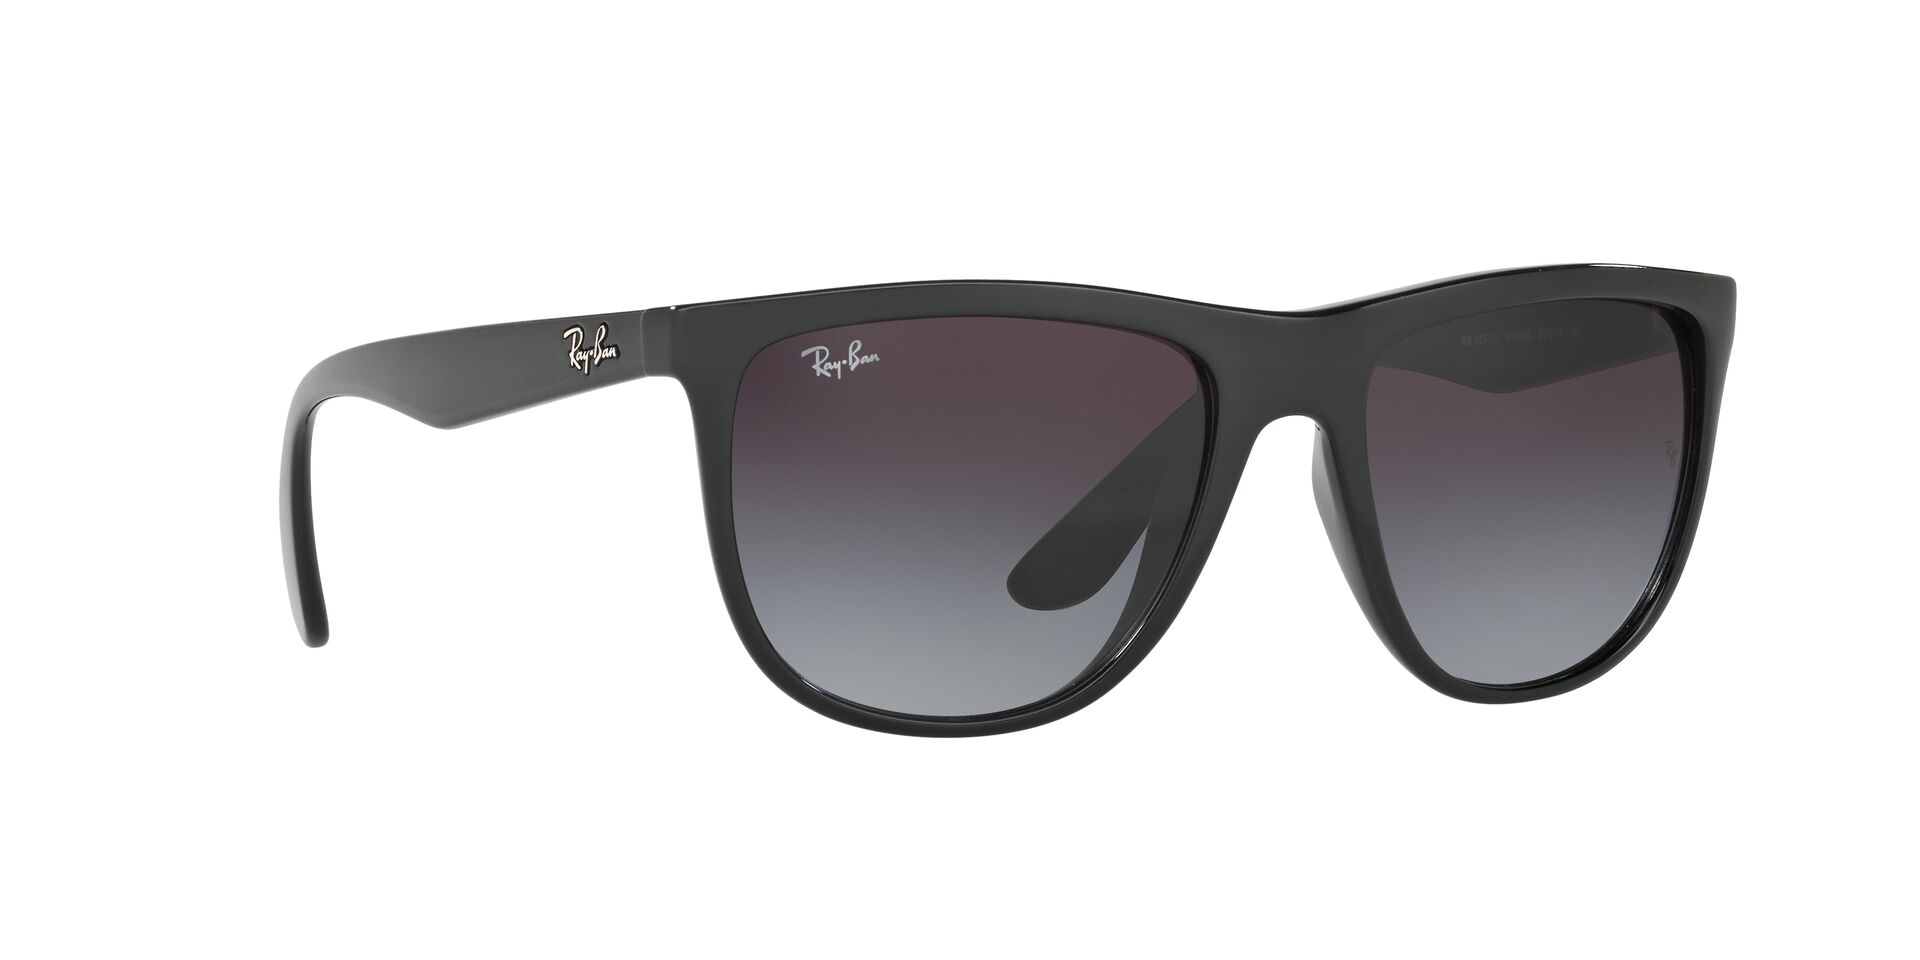 Buy Ray-Ban Rb4251I Sunglasses Online.